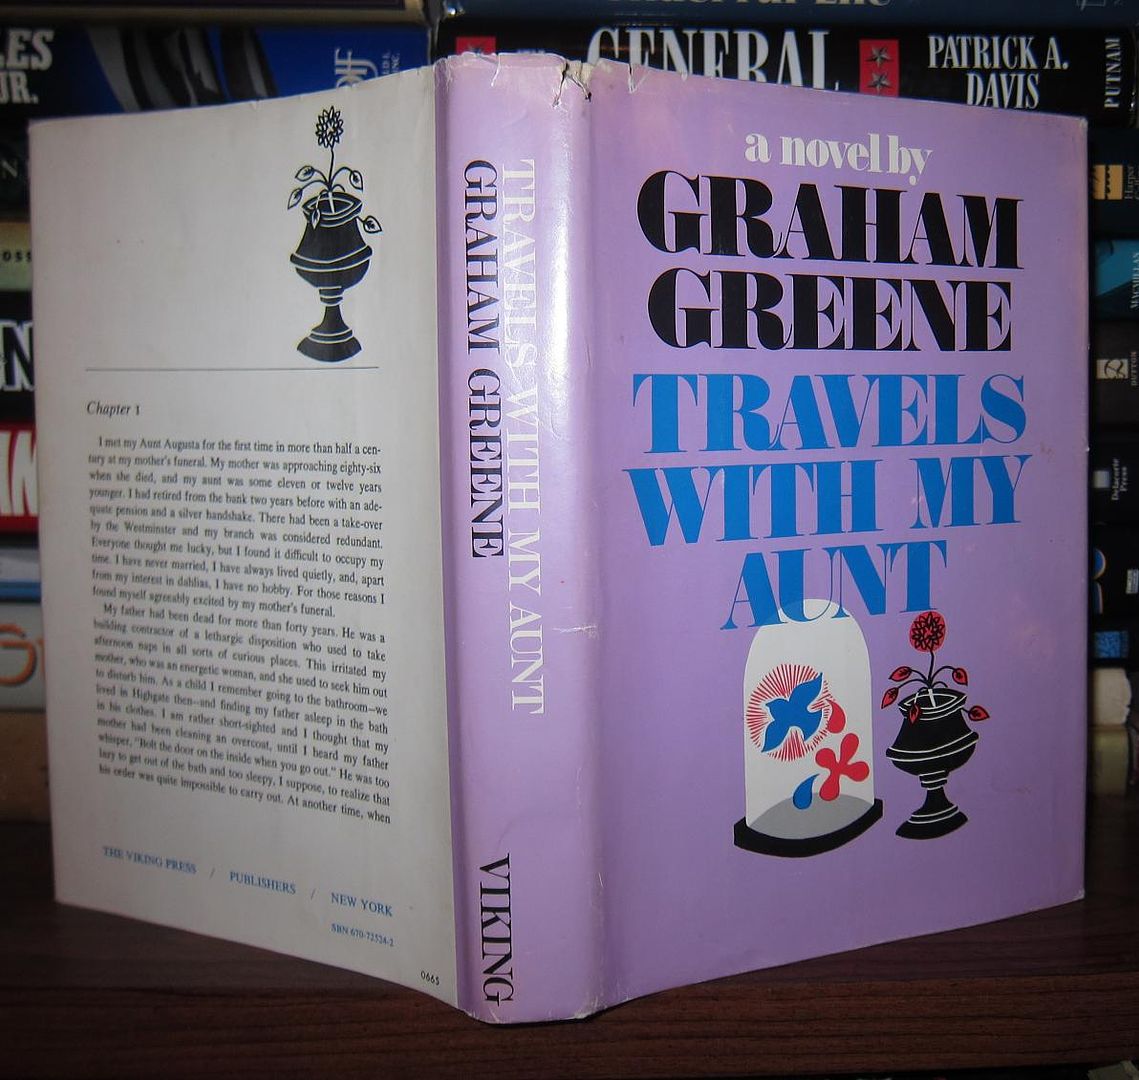 GREENE, GRAHAM - Travels with My Aunt